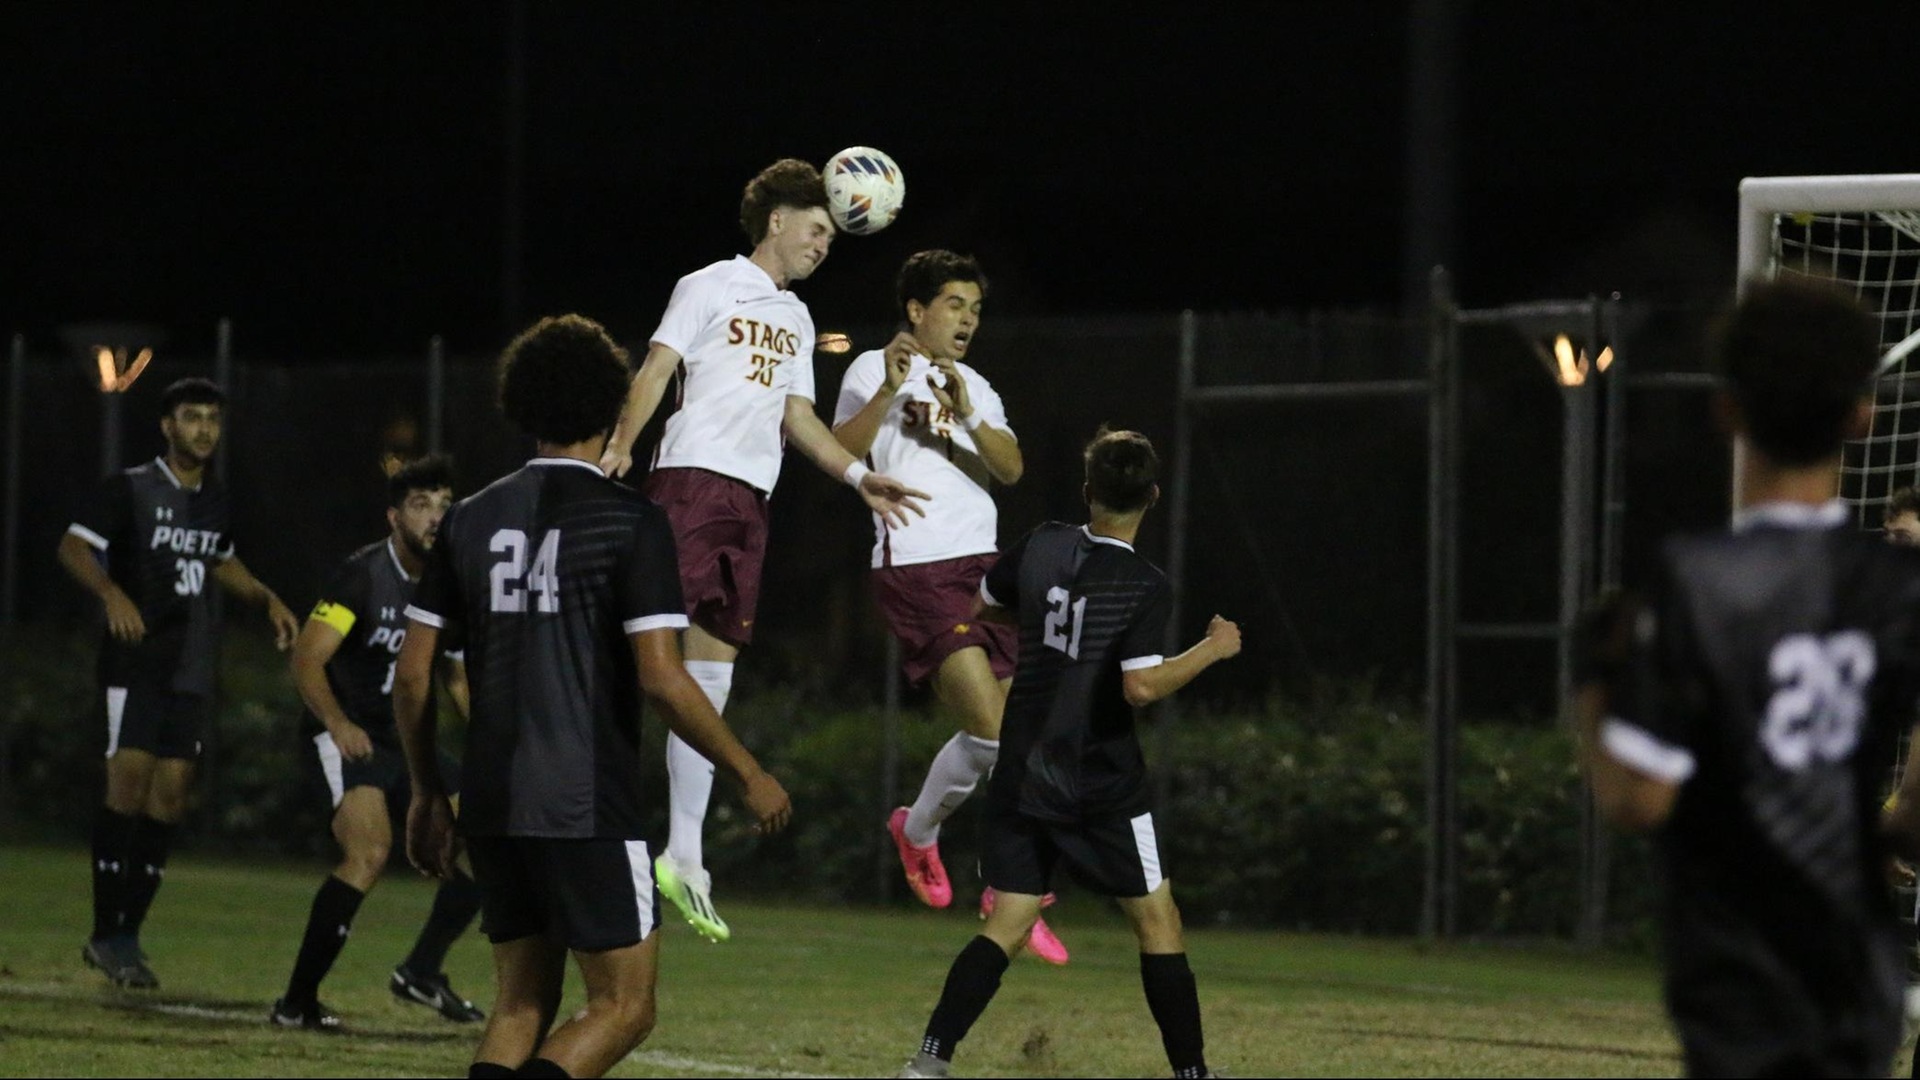 James Gomez heads in one of his two goals on the day (photo by Eva Fernandez)